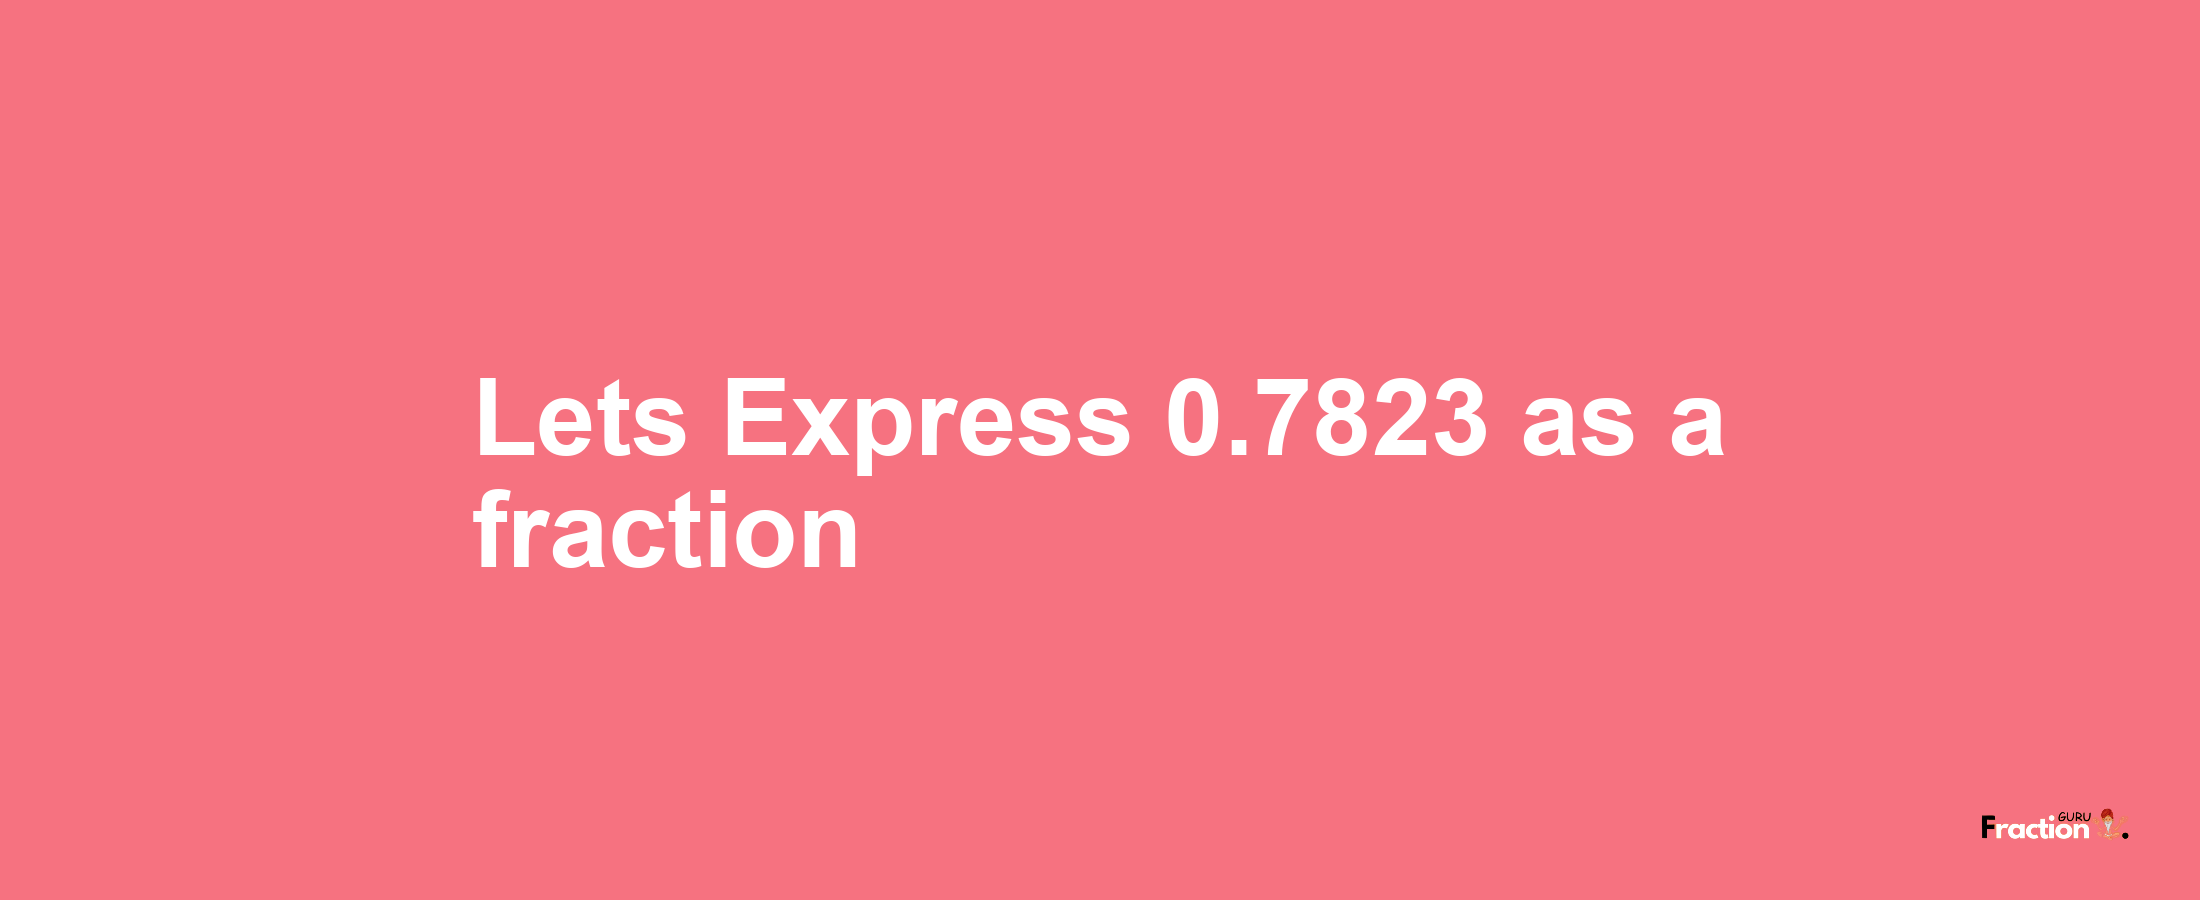 Lets Express 0.7823 as afraction